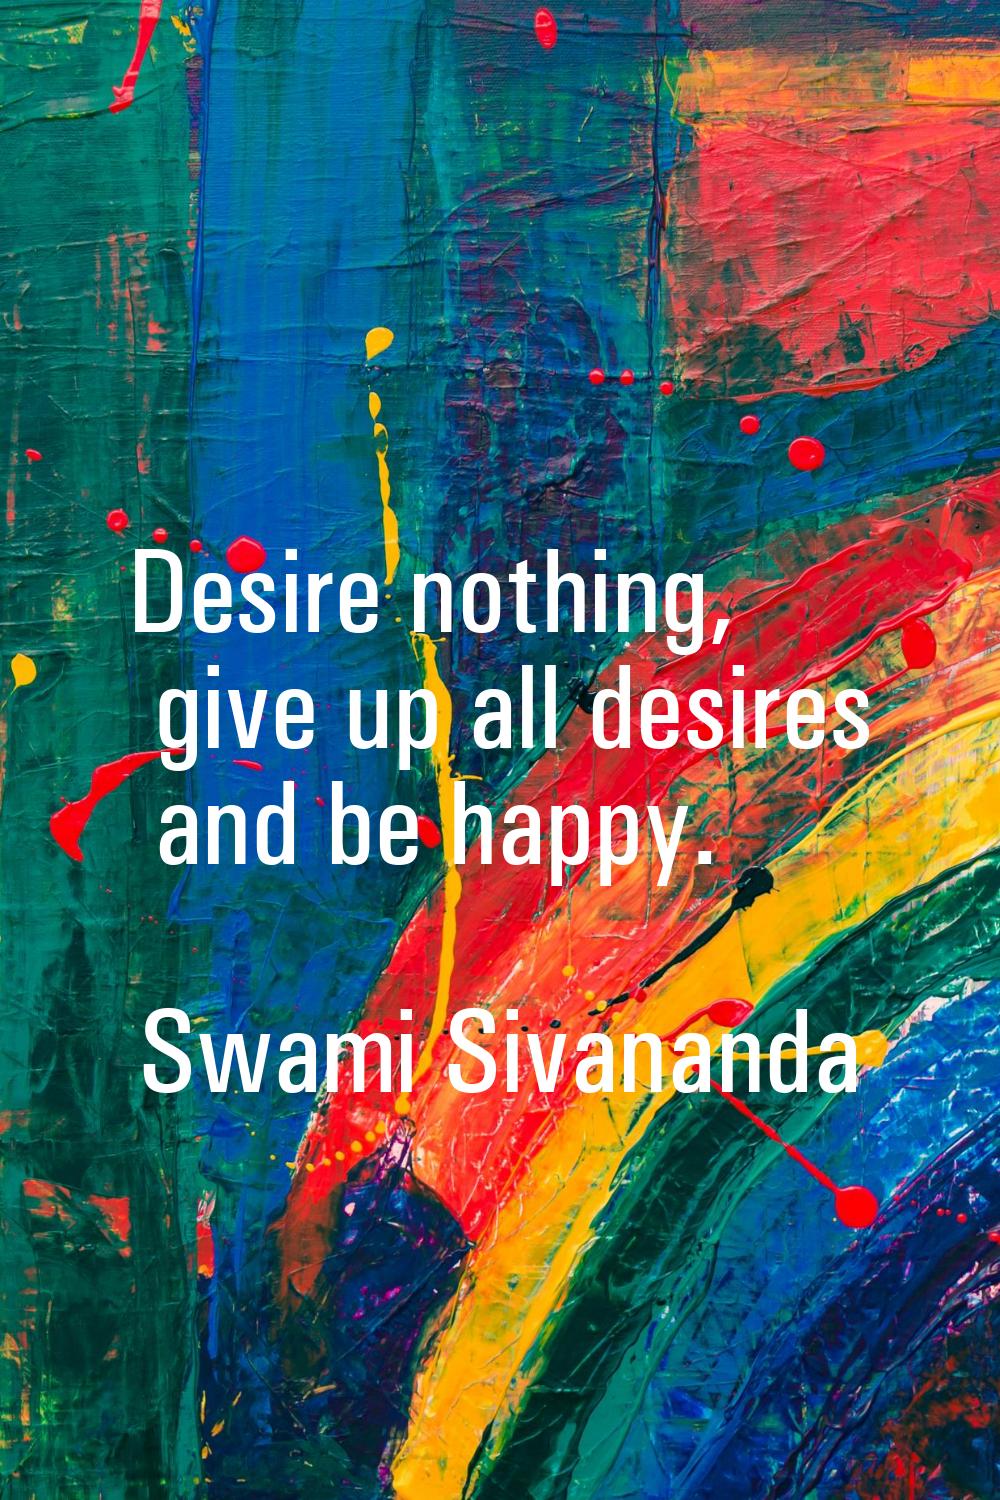 Desire nothing, give up all desires and be happy.